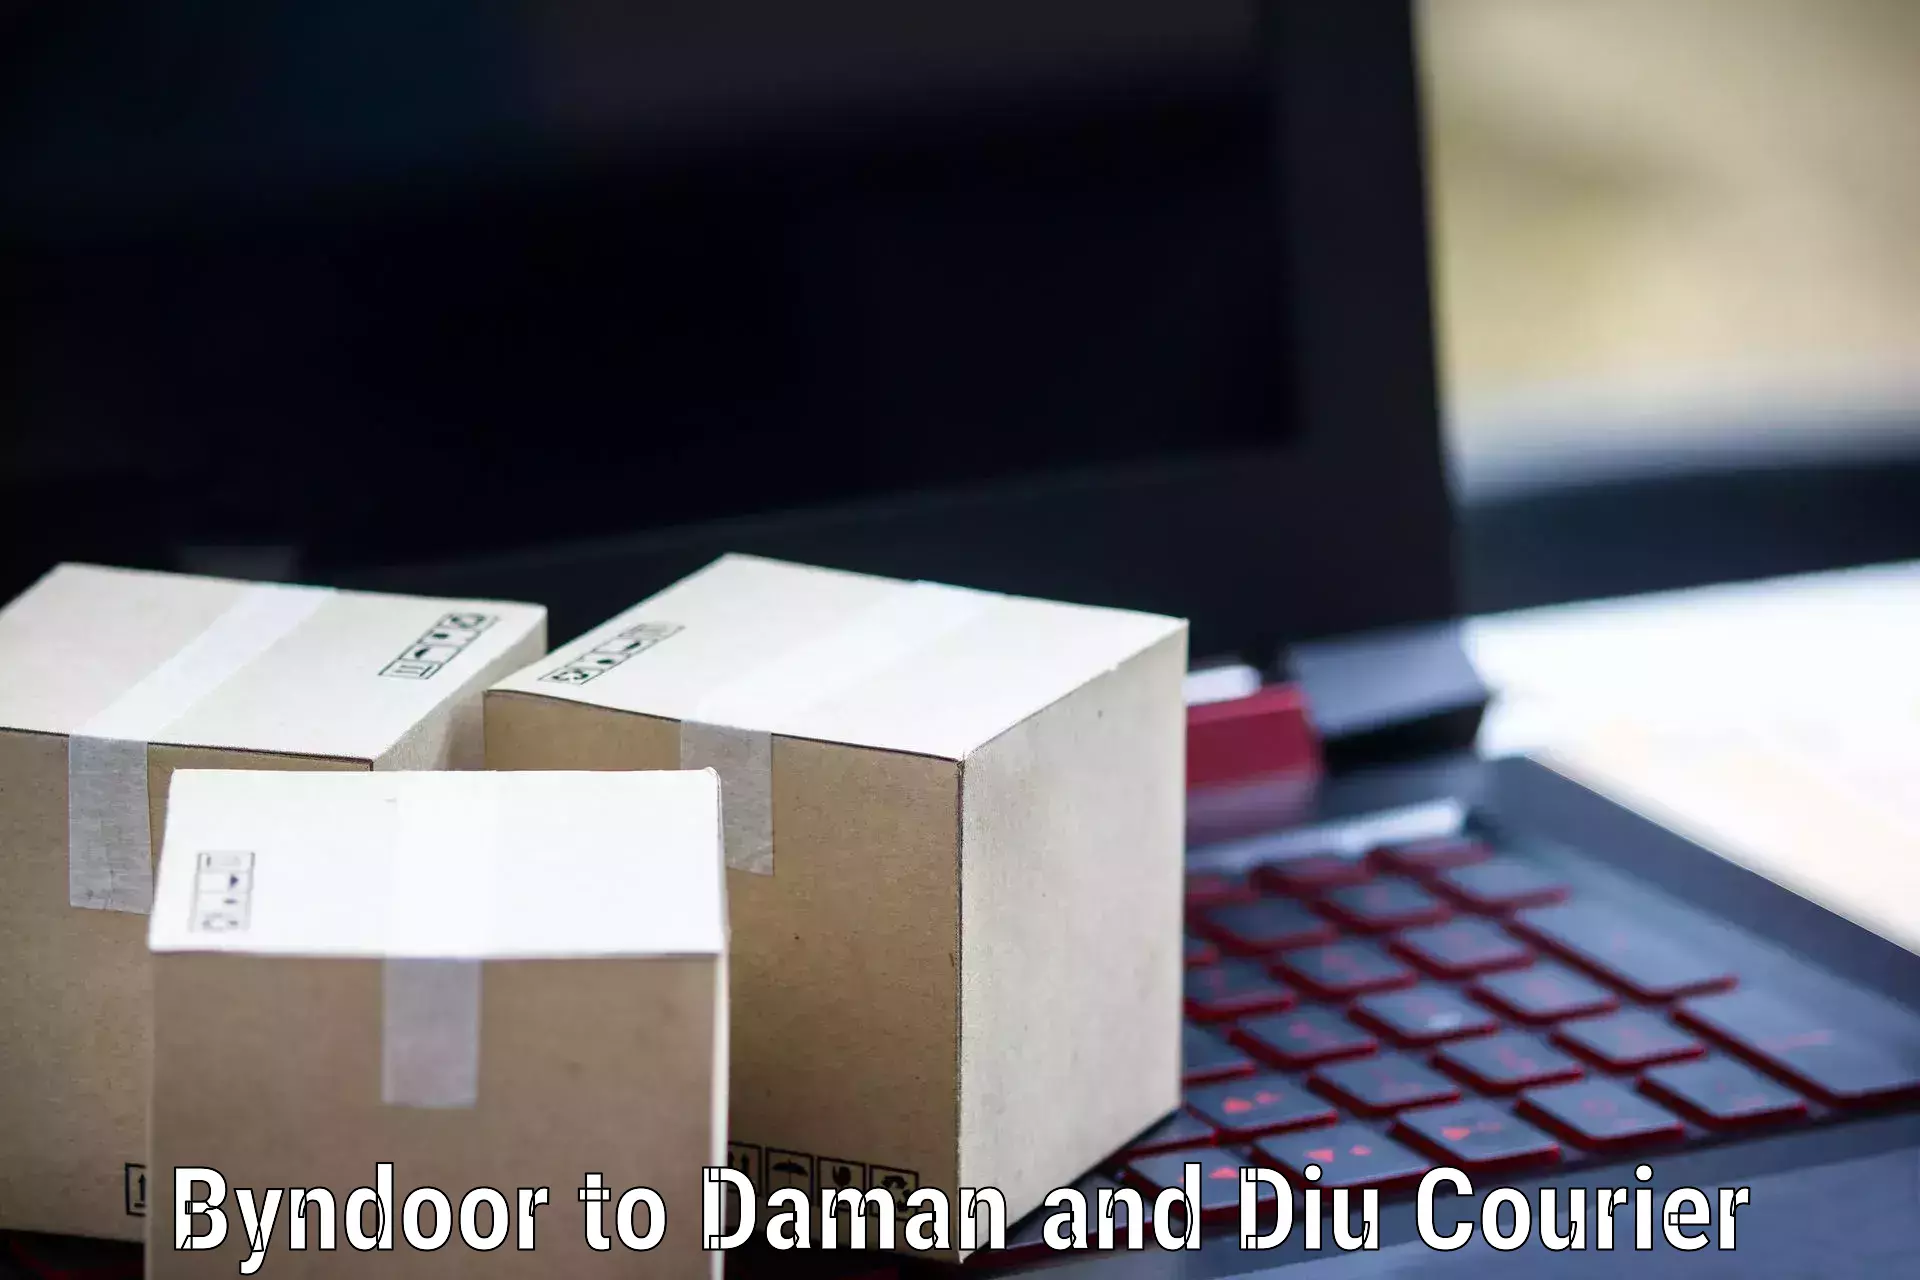 Professional courier handling Byndoor to Diu